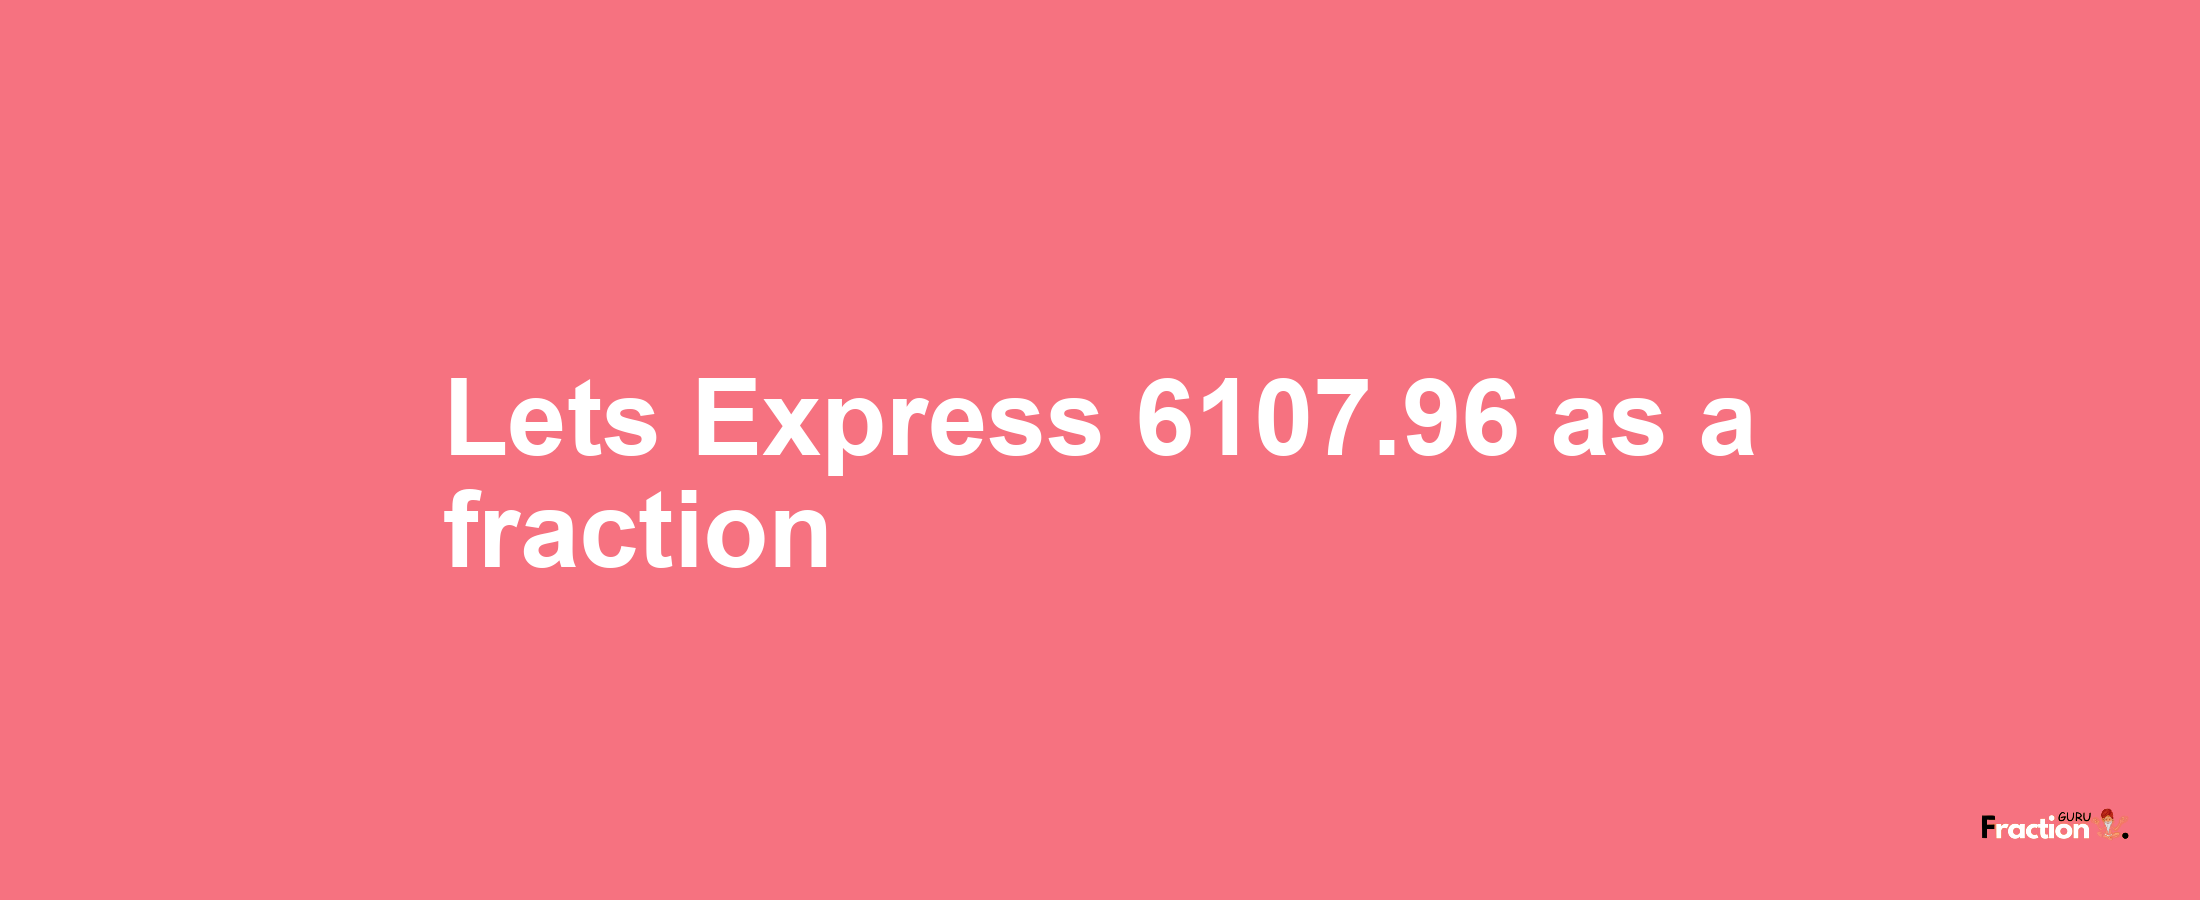 Lets Express 6107.96 as afraction